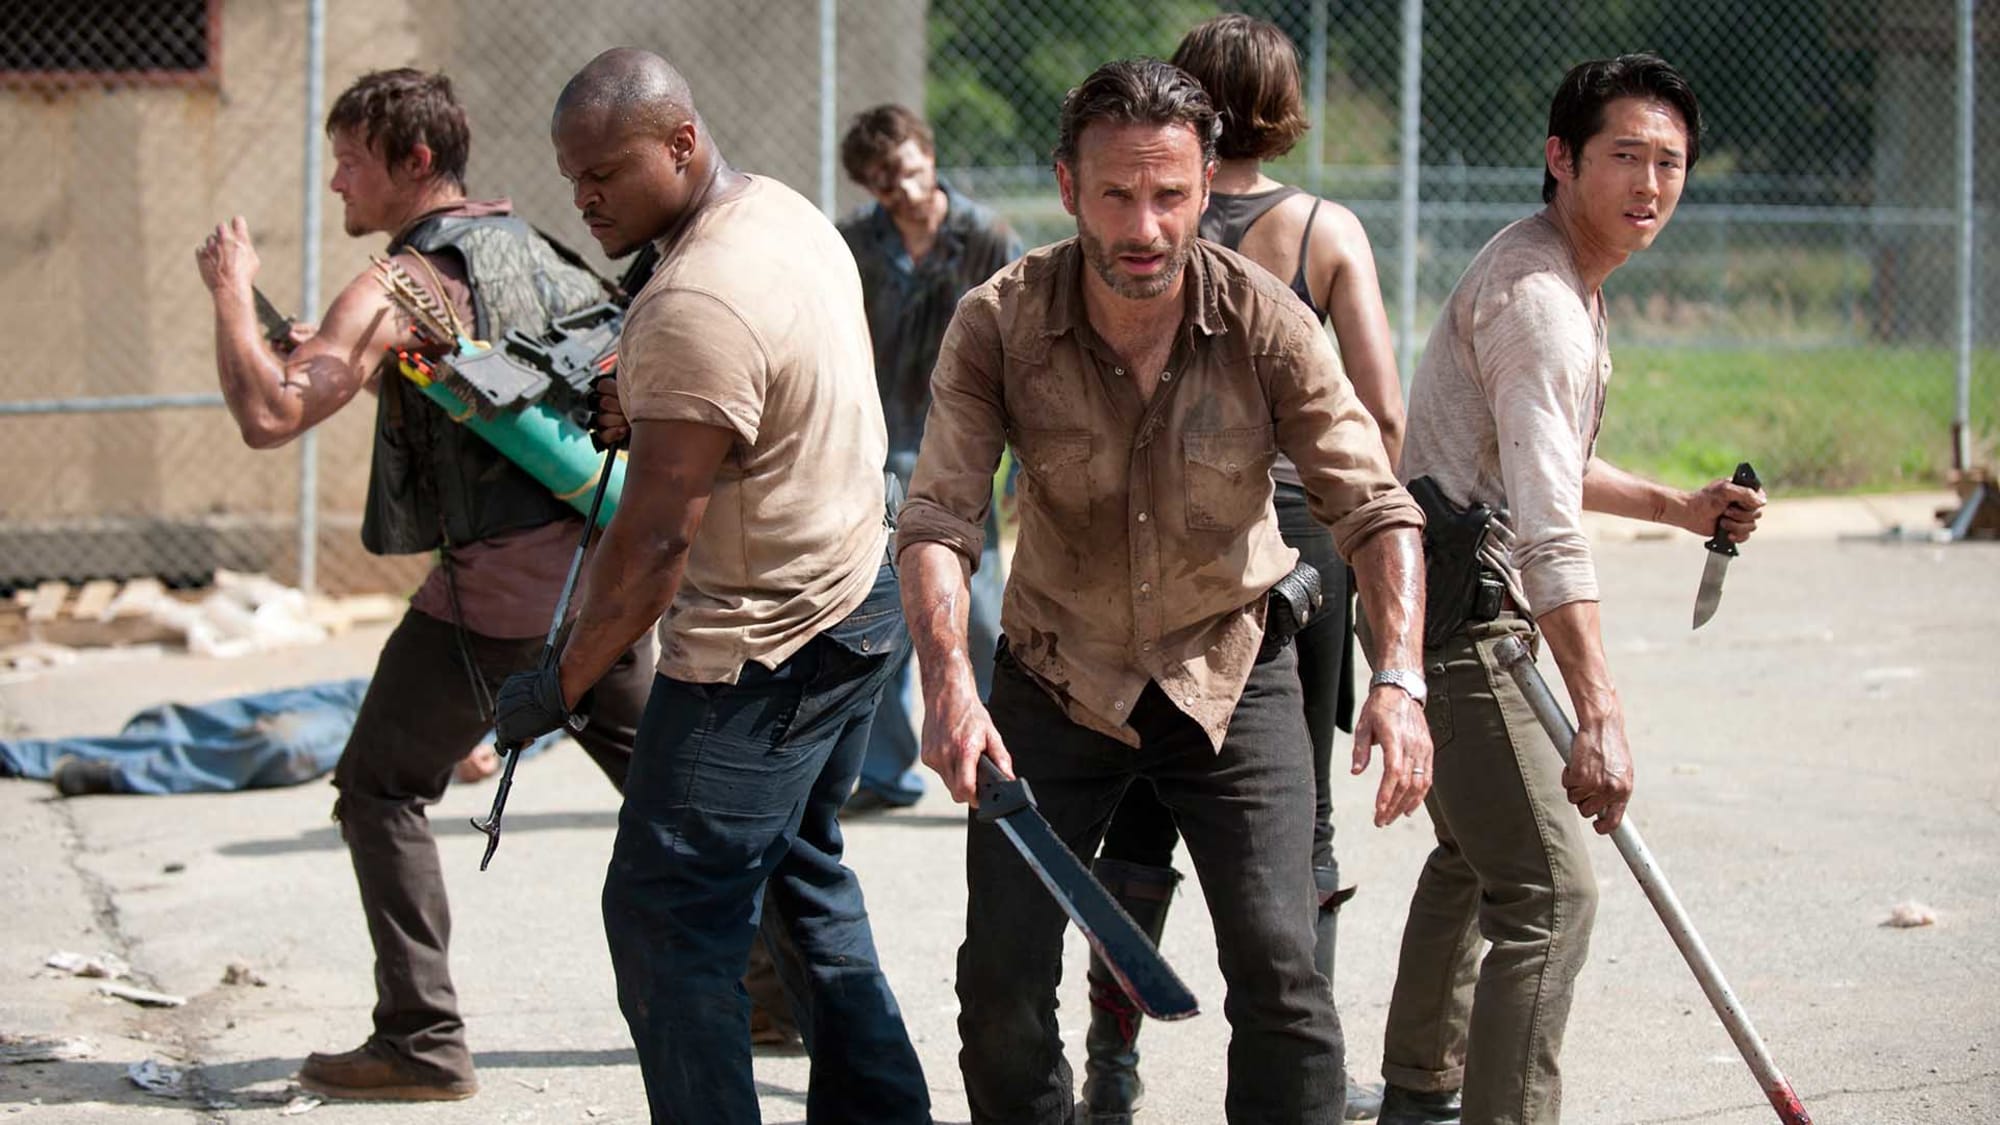 The Walking Dead 301: One man's prison is another man's home